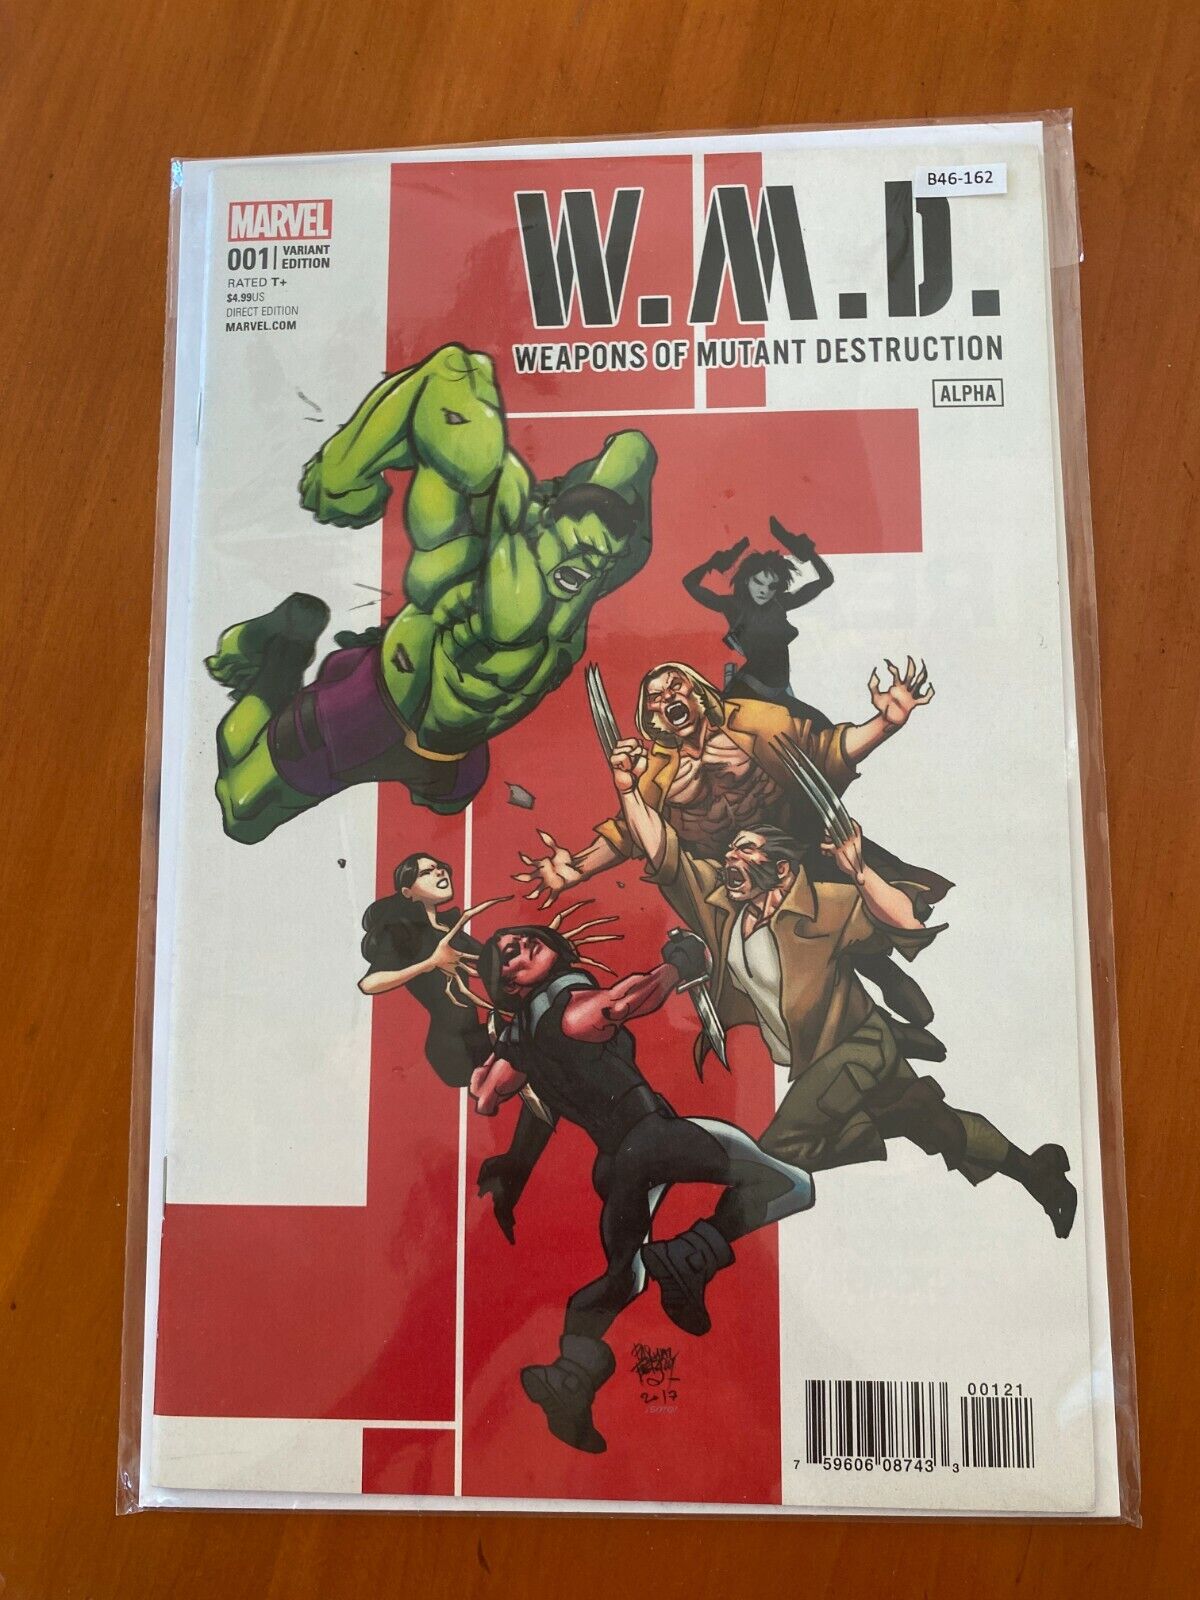 W.M.D 1 Weapons of Mutant - Variant Edition - High Grade Comic Book - B46-162